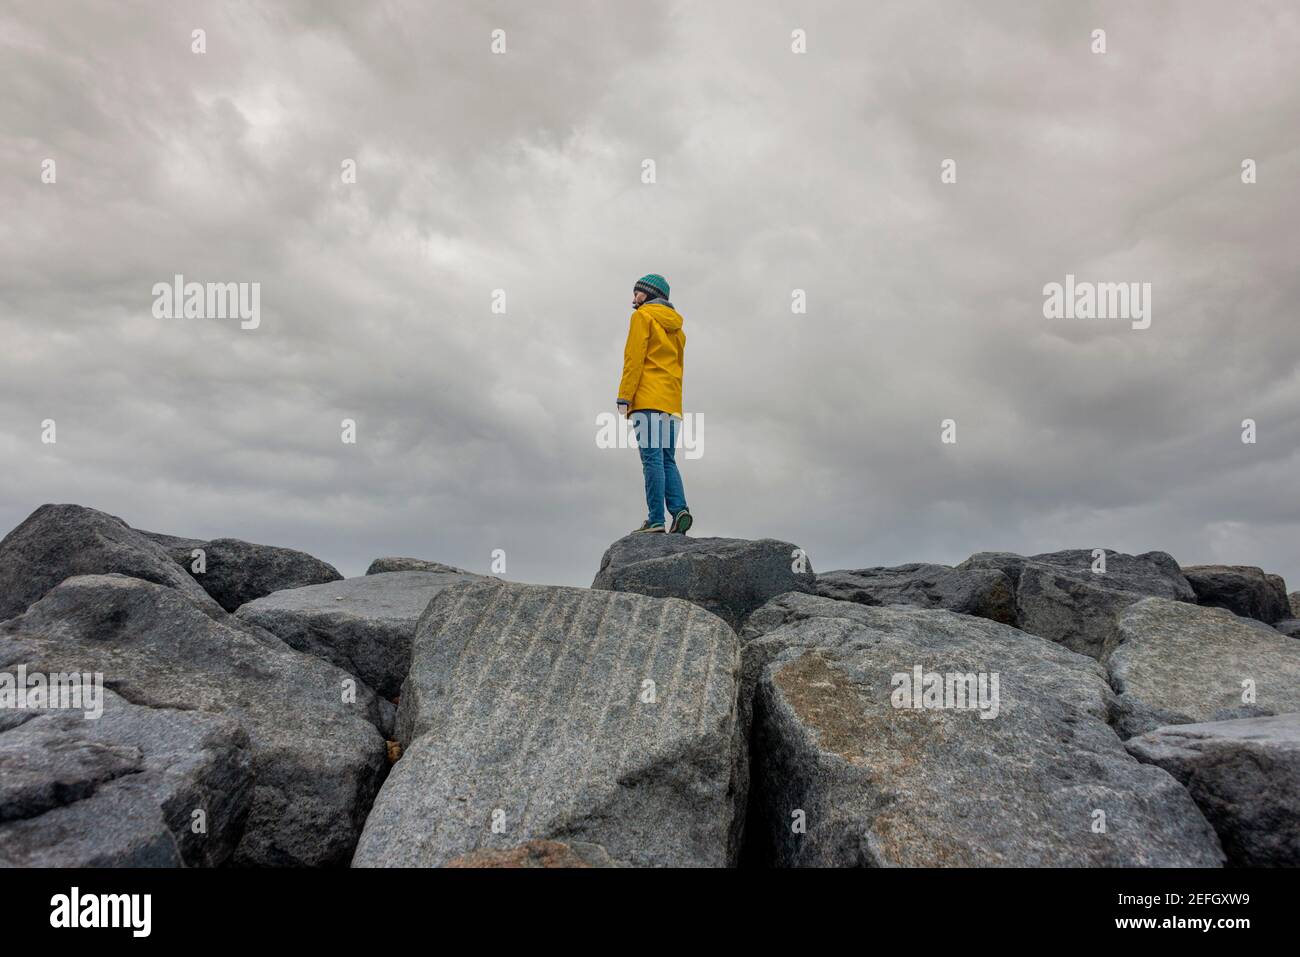 Woman wearing a yellow jacket standing on top of rocks. Away from it all. Stock Photo